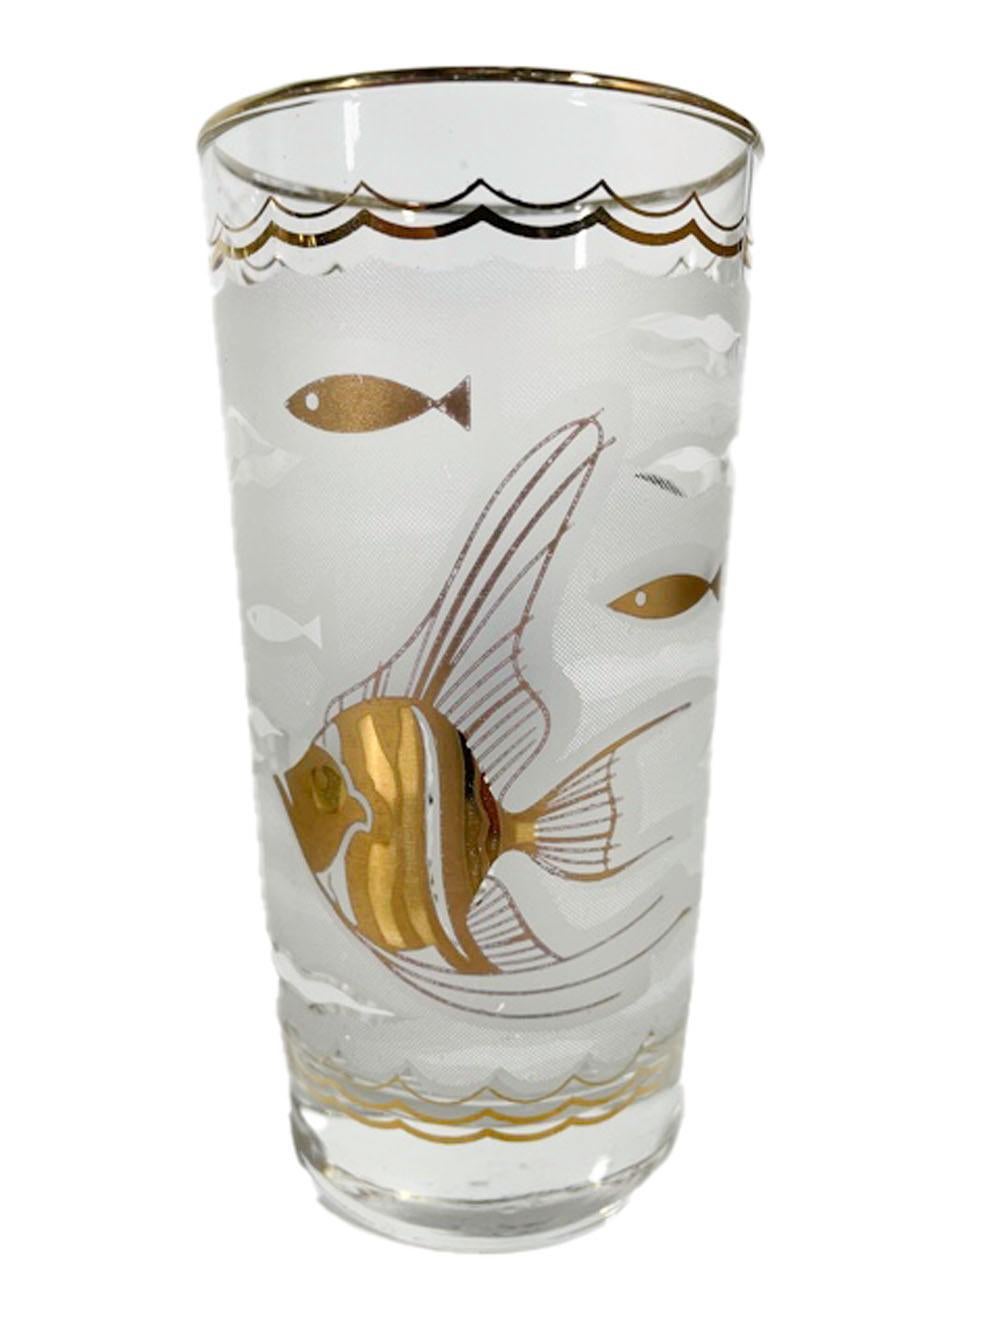 Eight Mid-Century Modern highball glasses by Libbey Glass, having a frosted water-patterned ground with large angel fish and small stylized fish in 22k gold on front and back, the sides decorated with seahorses in white enamel.